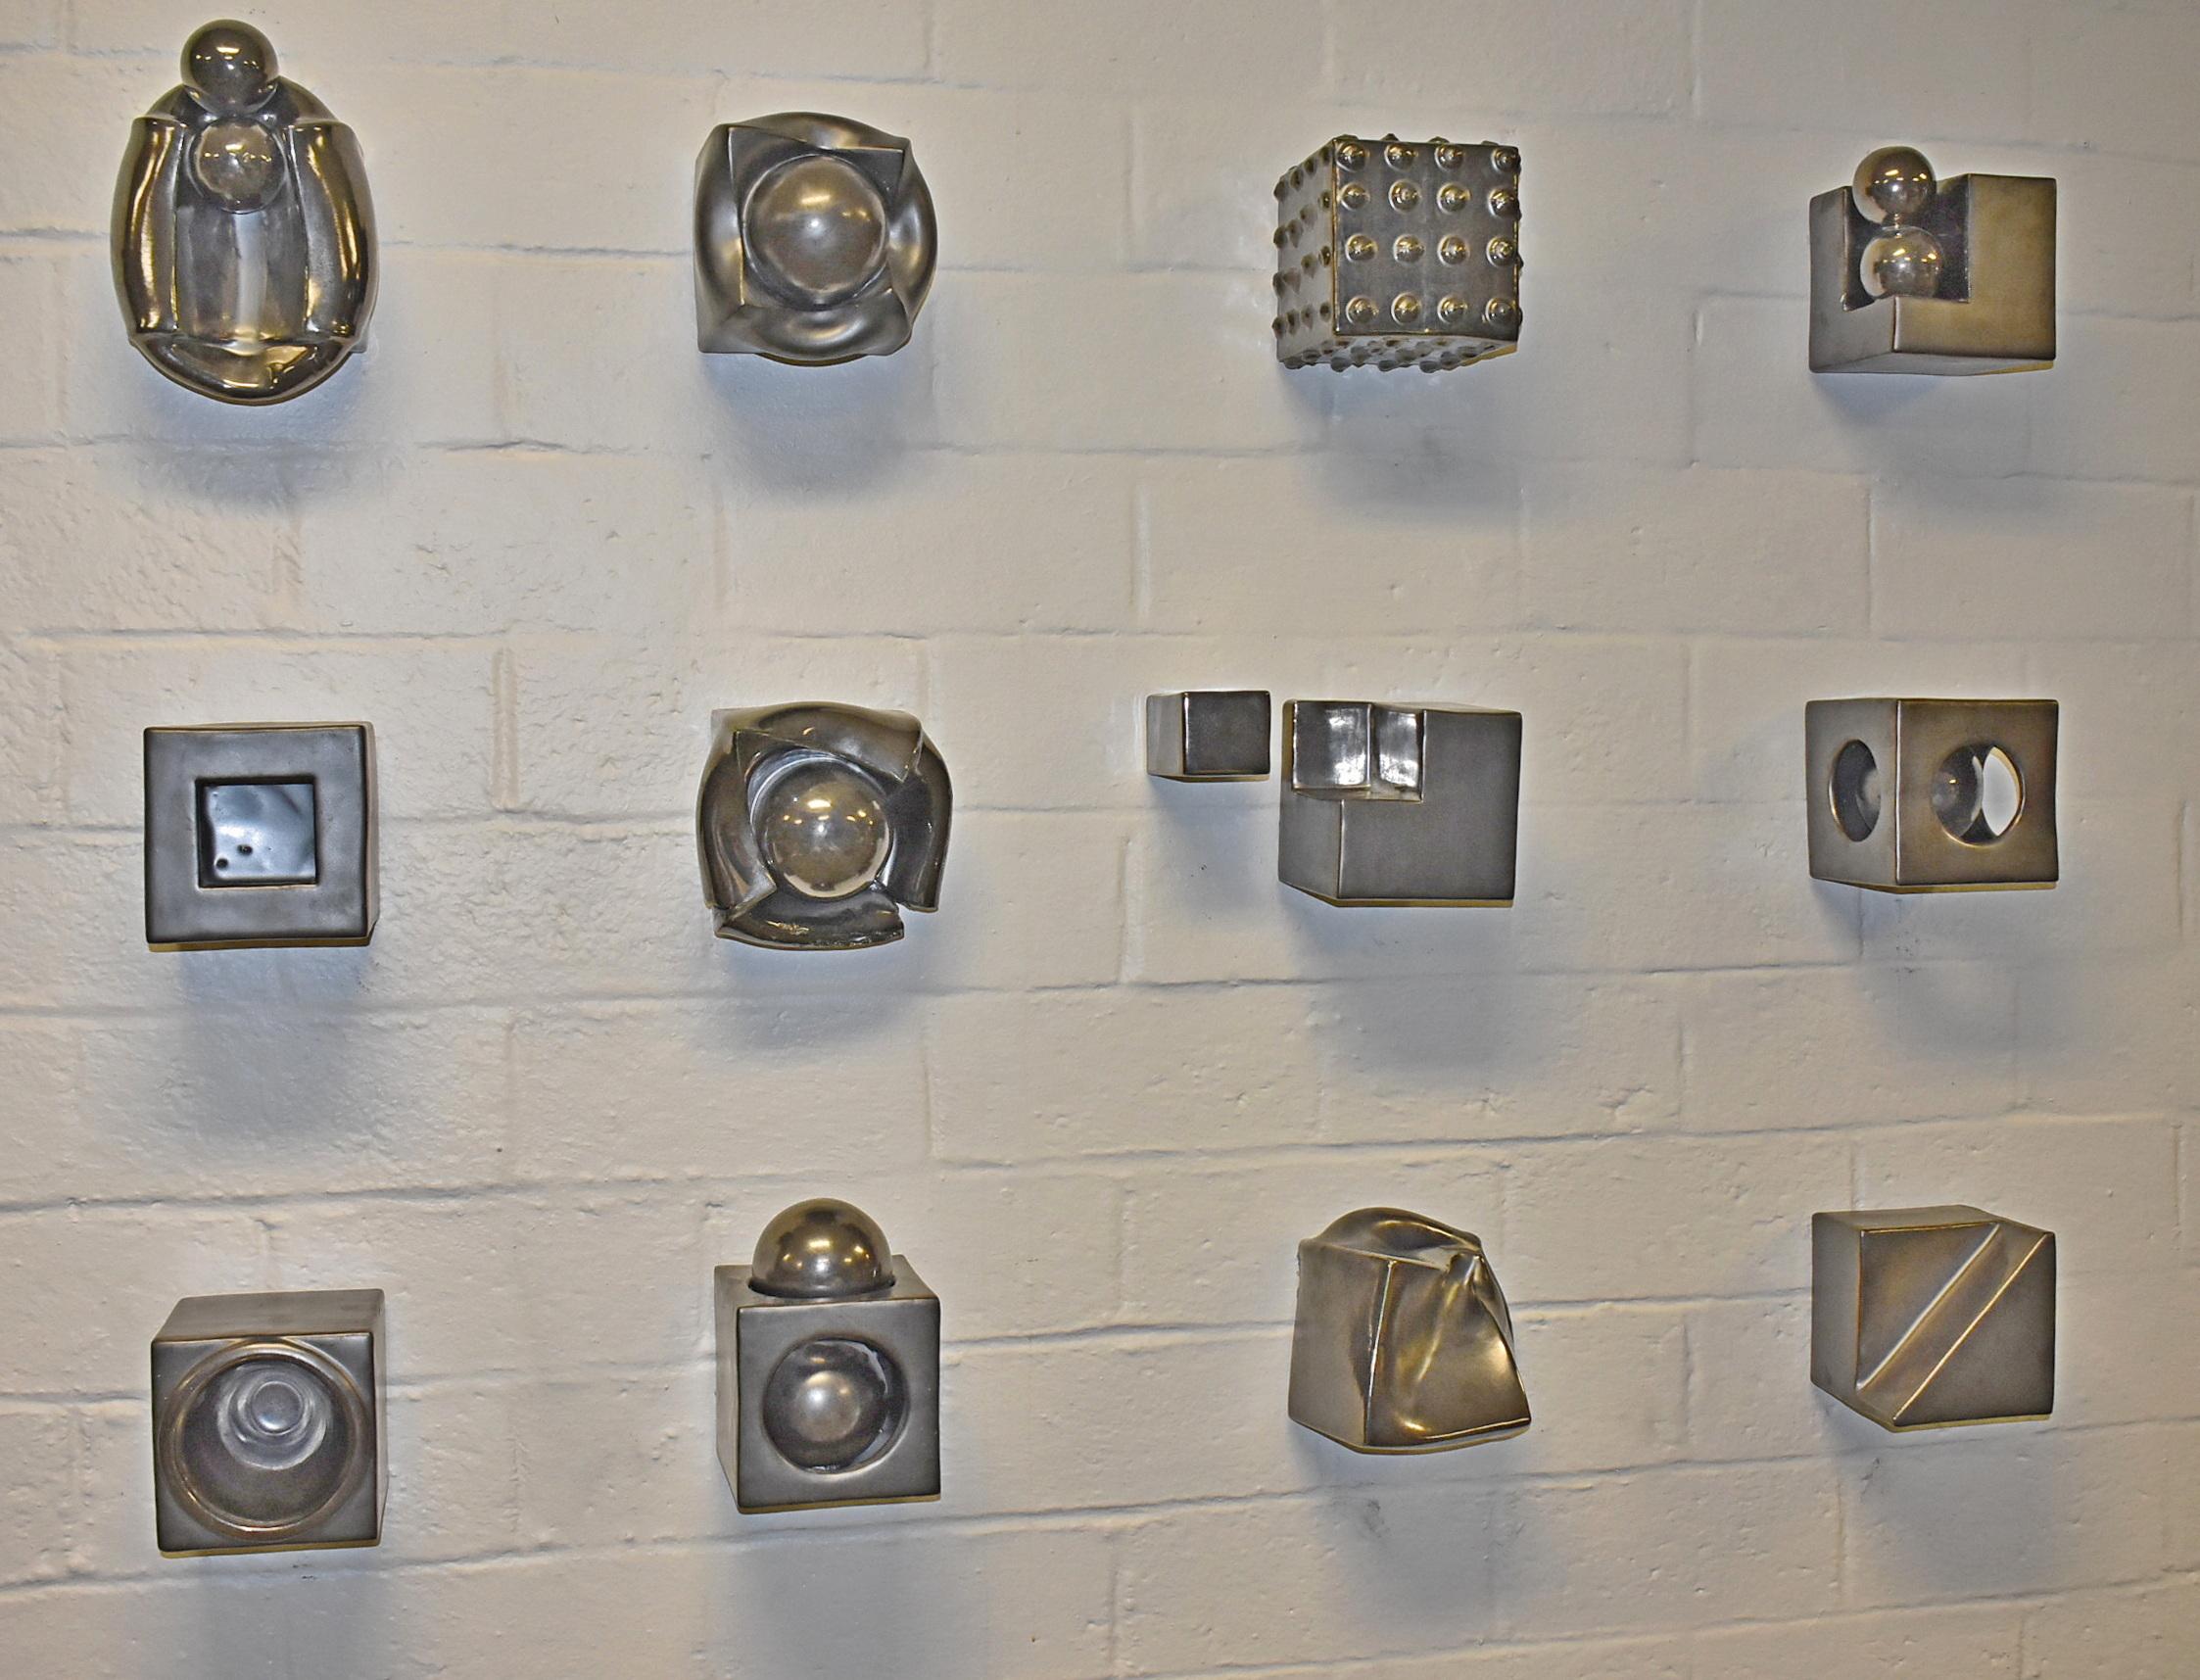 Ceramic 3D cube abstract modern wall art sculpture, 13 pieces. Suidan's cube series dates back to early 2000's. Collection of 13 cube sculptures by artist Kaiser Suidan. Various geometric forms in gun metal glaze. Wall mounted and signed on back.